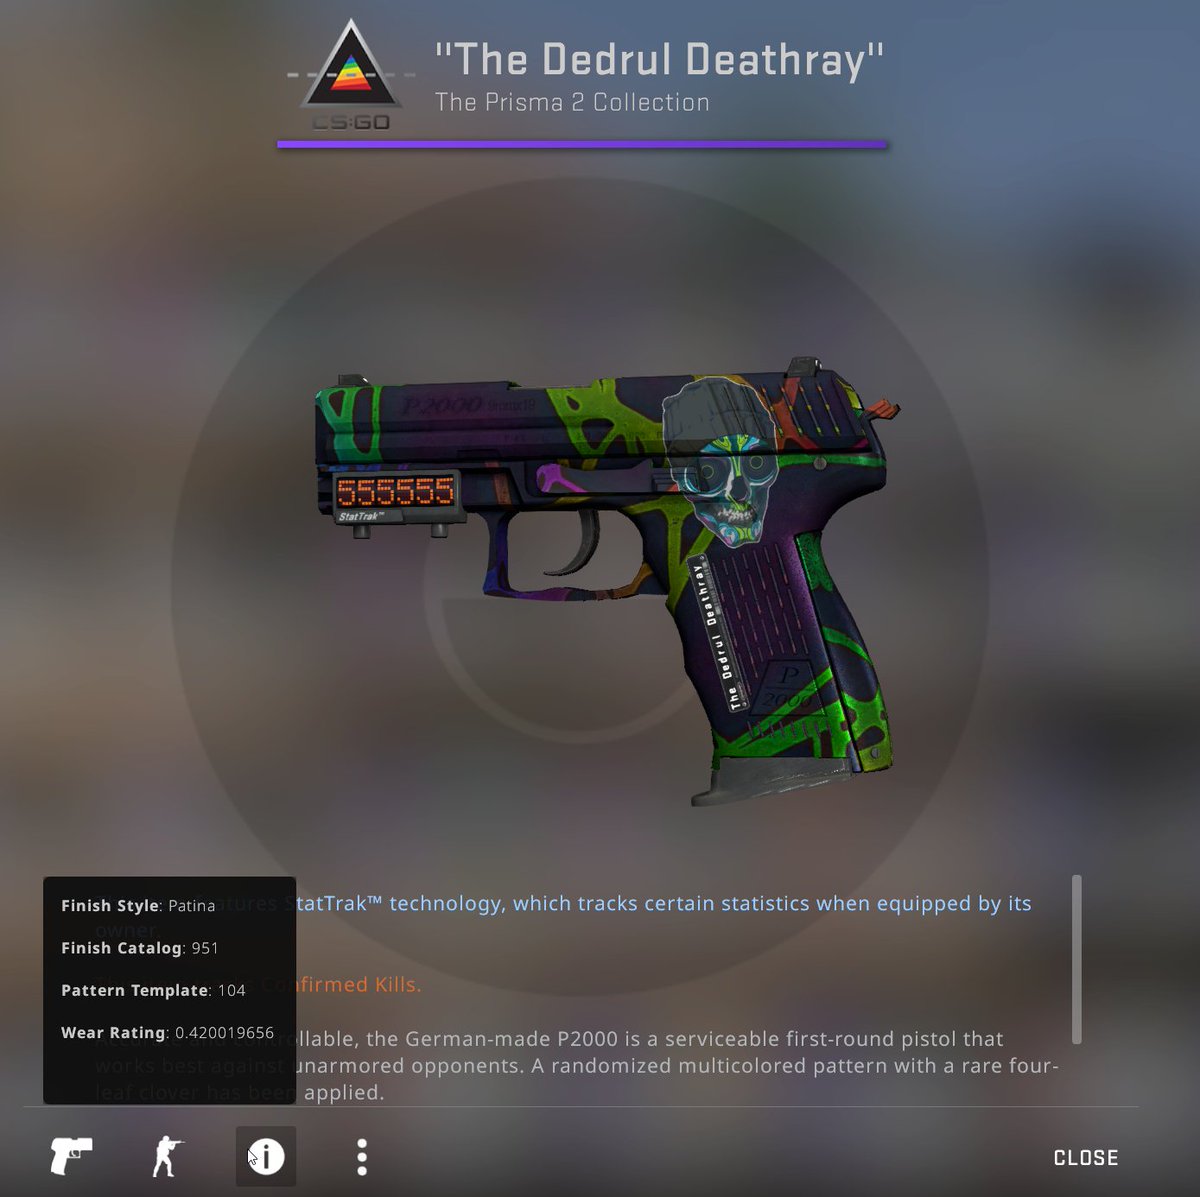 I received a dank gift from my homie @OGdedrul  ! Thanks so much bro. I've always loved your collection, especially that Deagle Sunset Storm I used to own! 😆